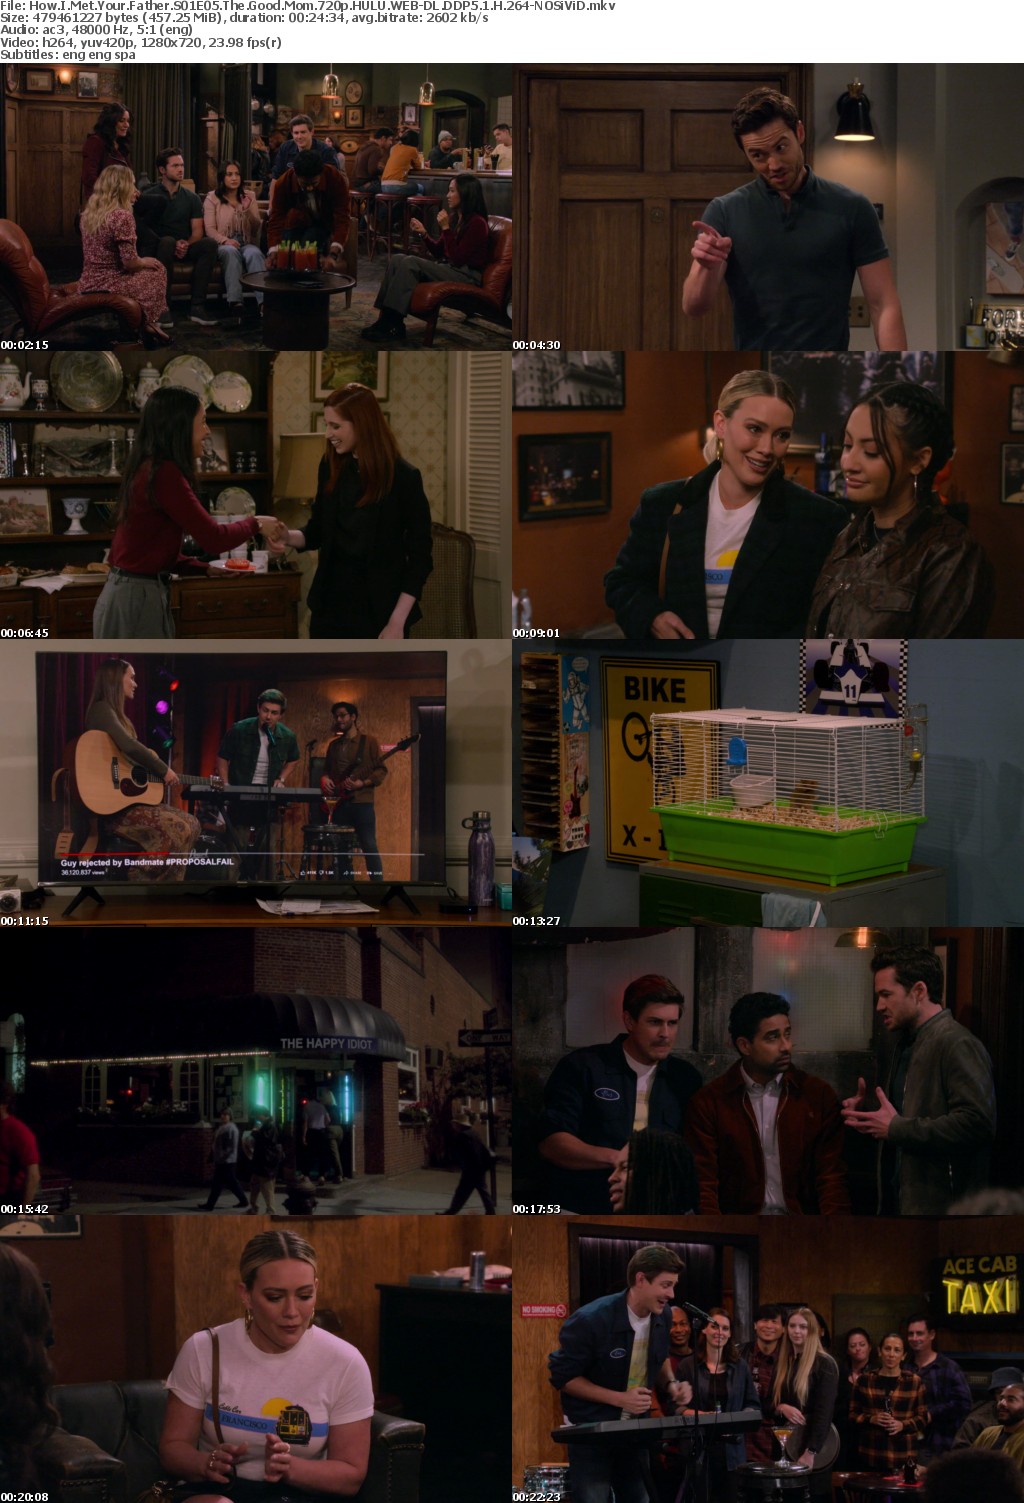 How I Met Your Father S01E05 The Good Mom 720p HULU WEBRip DDP5 1 x264-NOSiViD